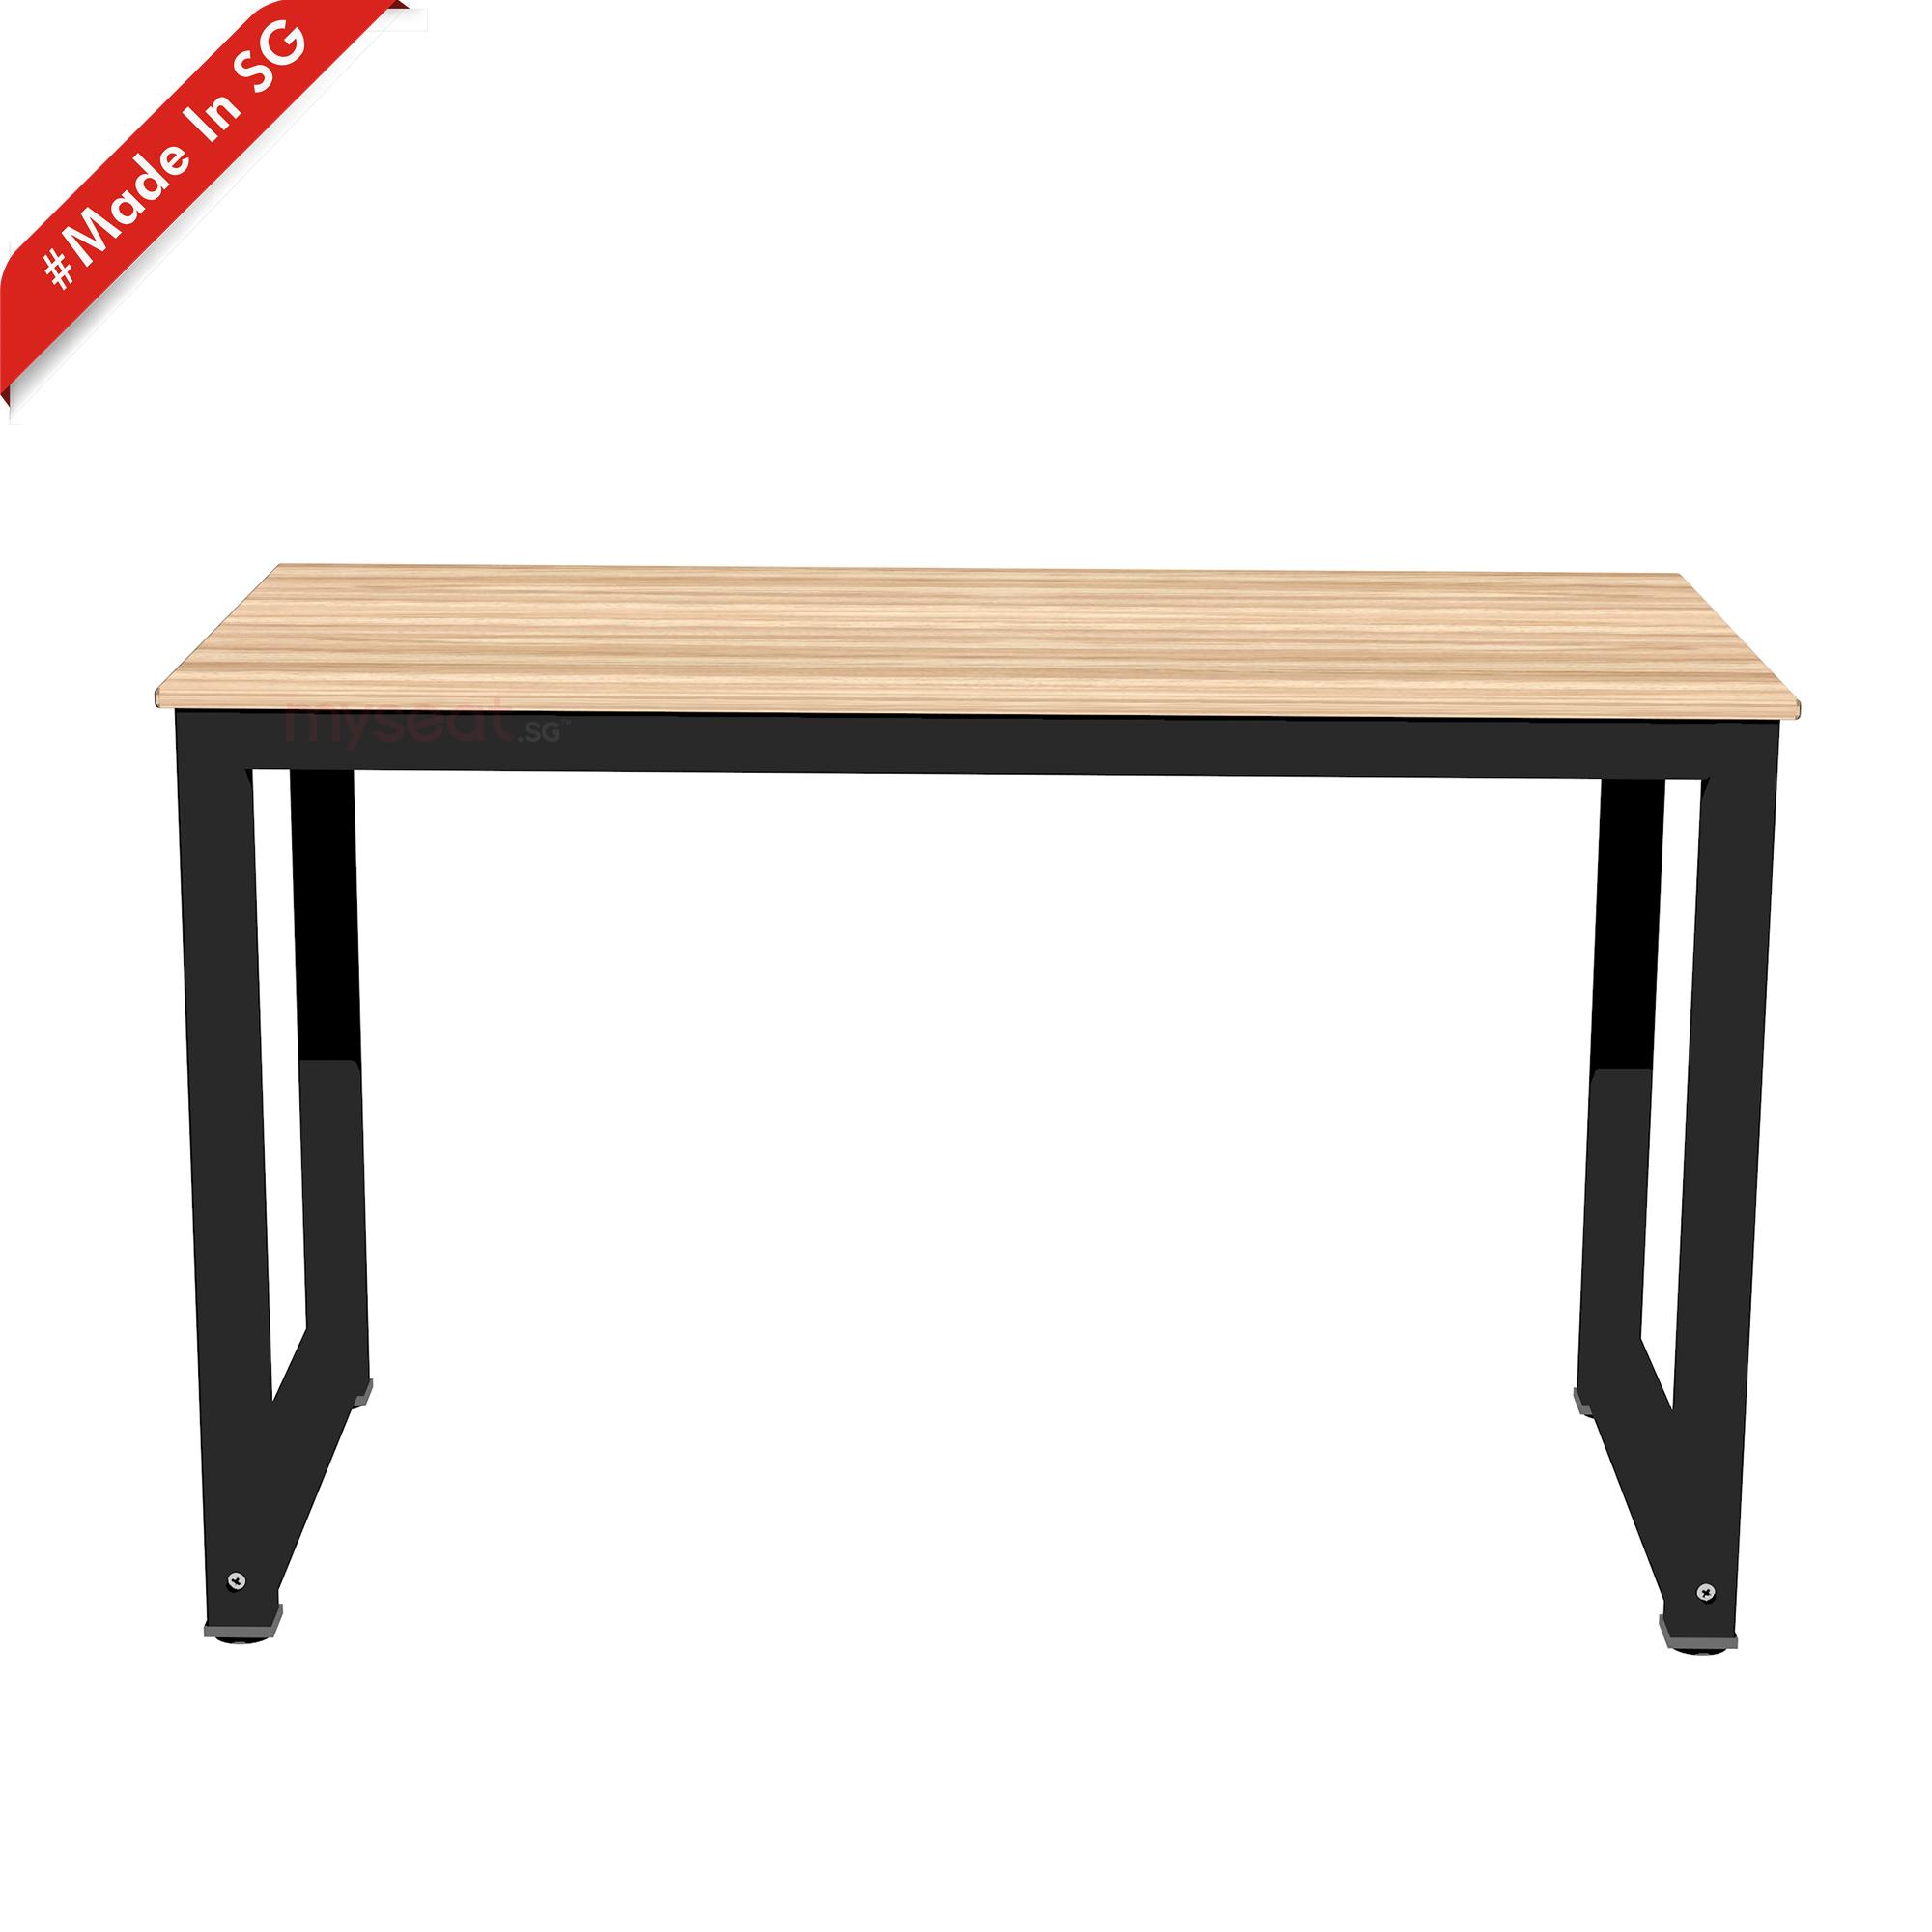 Myseat Sg Logan Study Table Buy Sell Online Home Office Desks